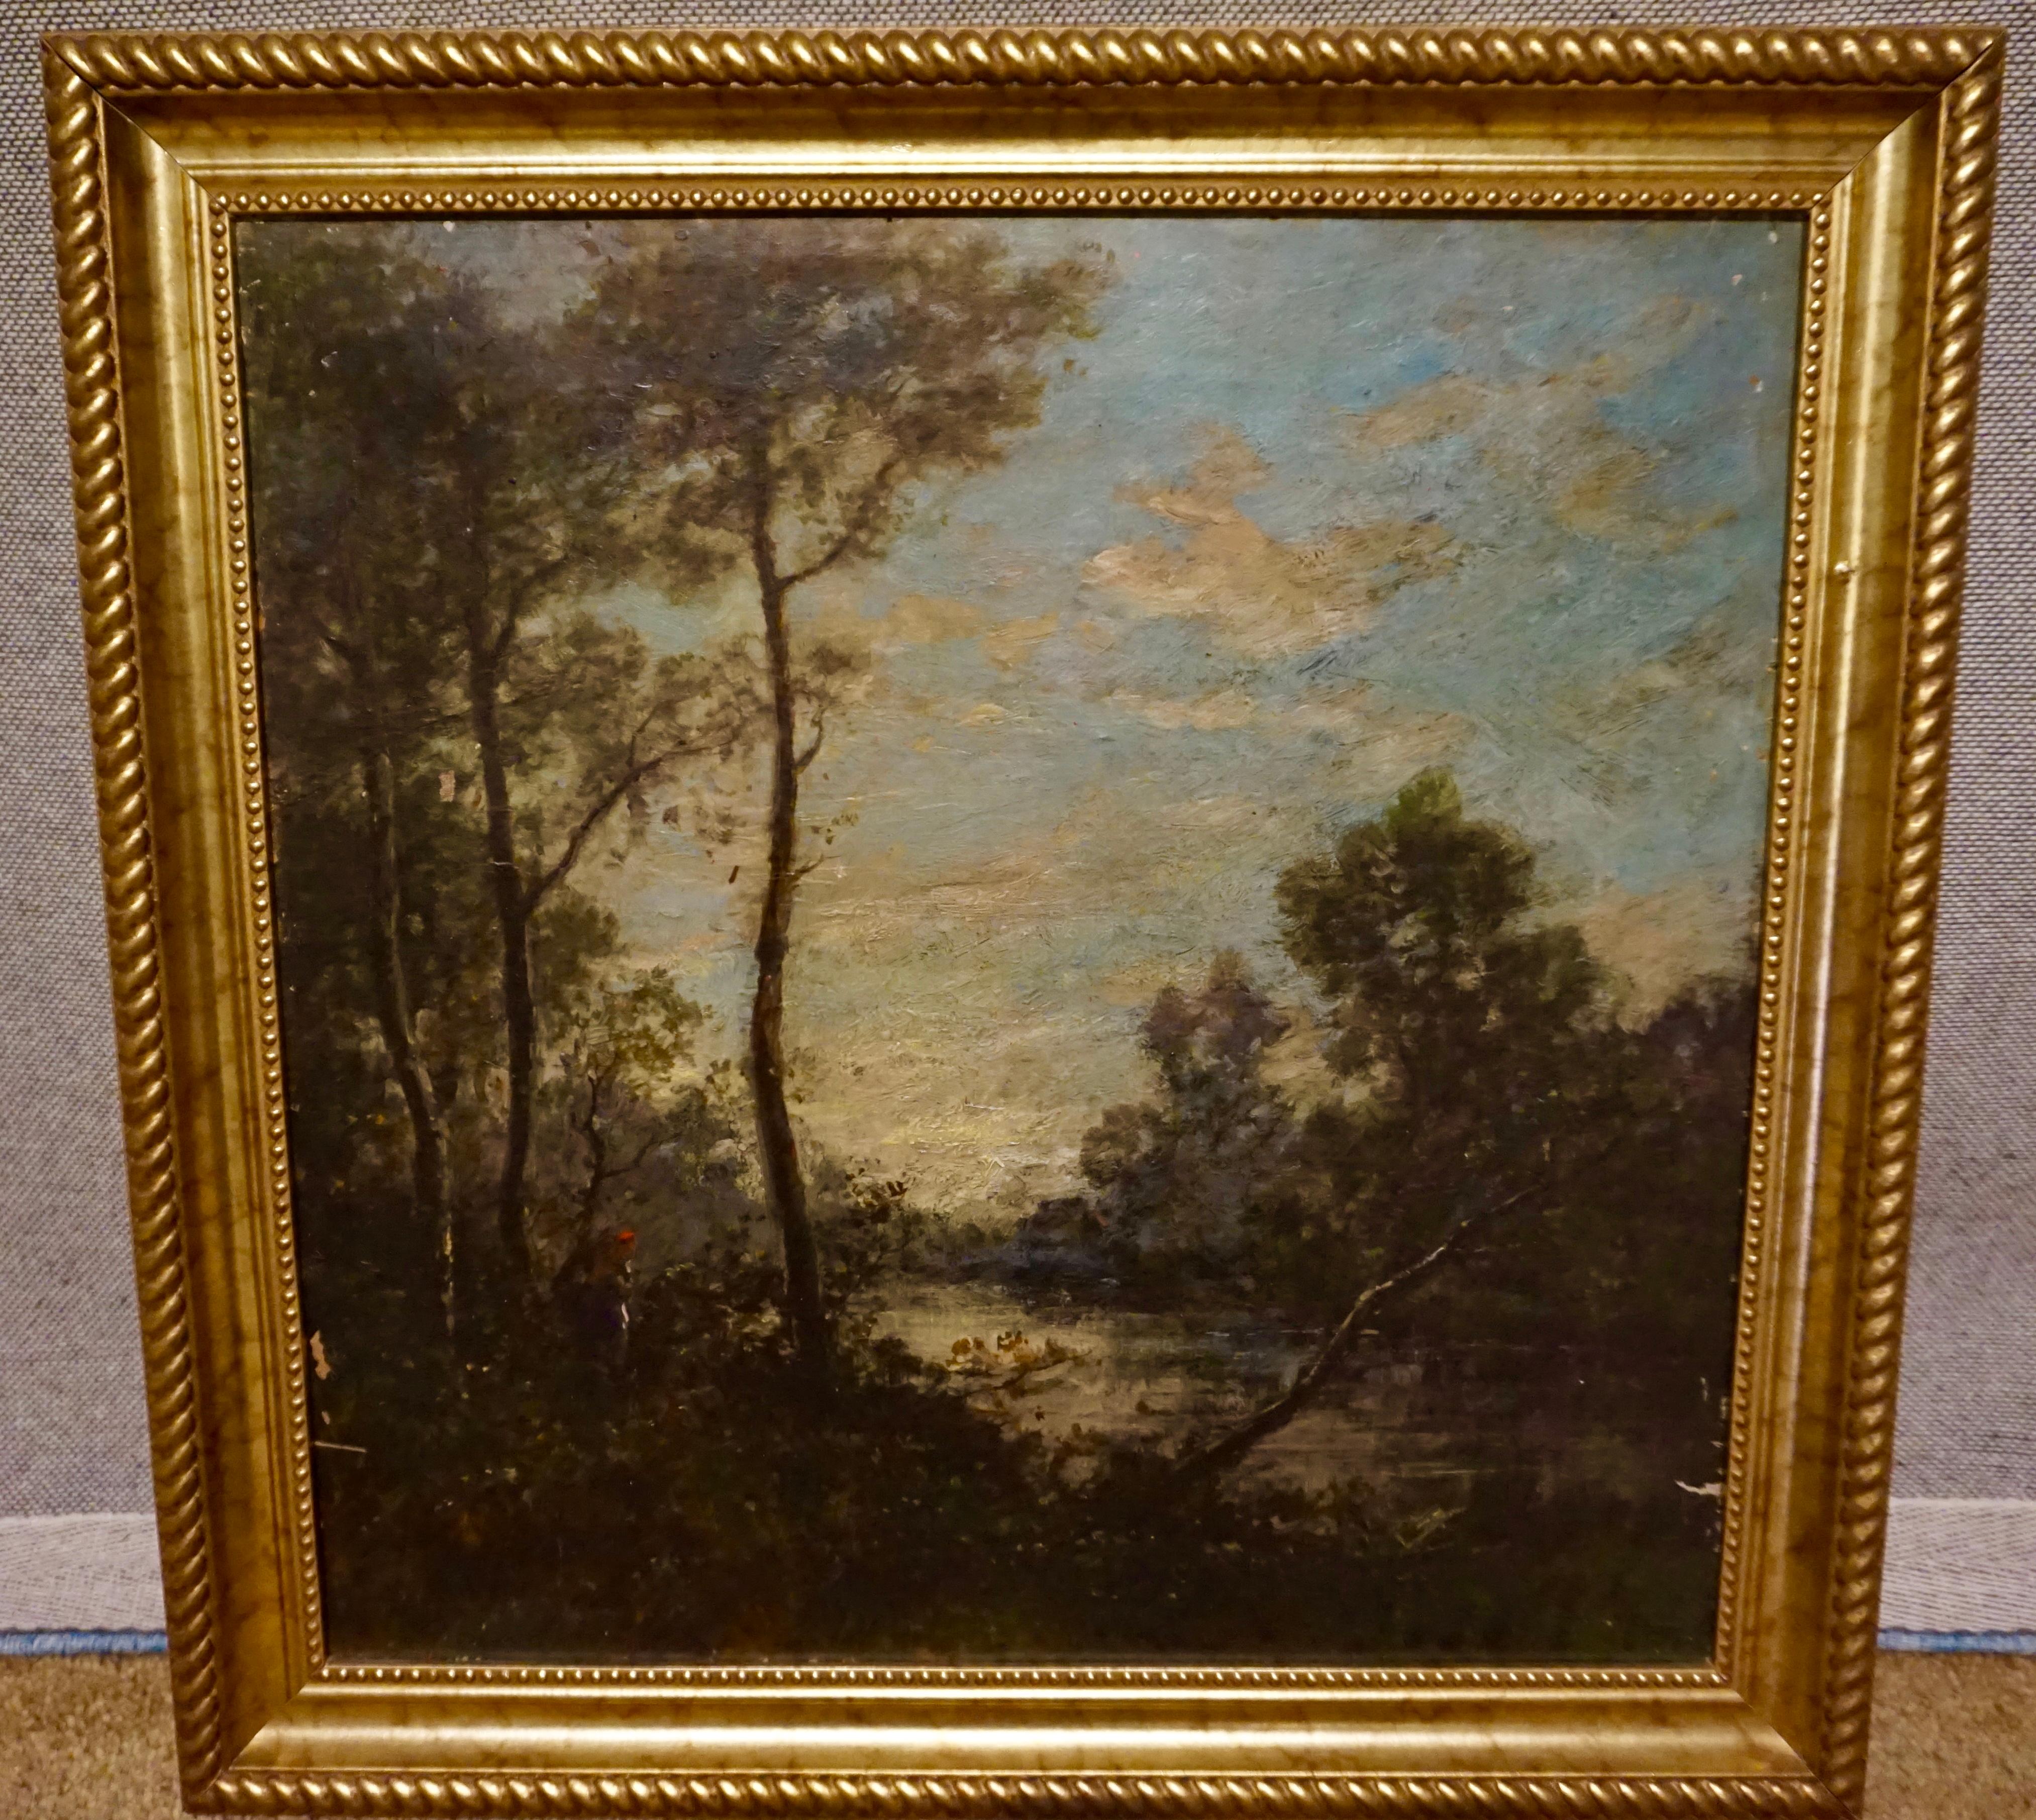 Oil on canvas painting attributed to the school of esteemed French painter Jean-Baptiste-Camille-Corot. Likely painted in his style by a student and signed by him. Signature present. Lovely old patina. Some scratches on canvas as photographed.